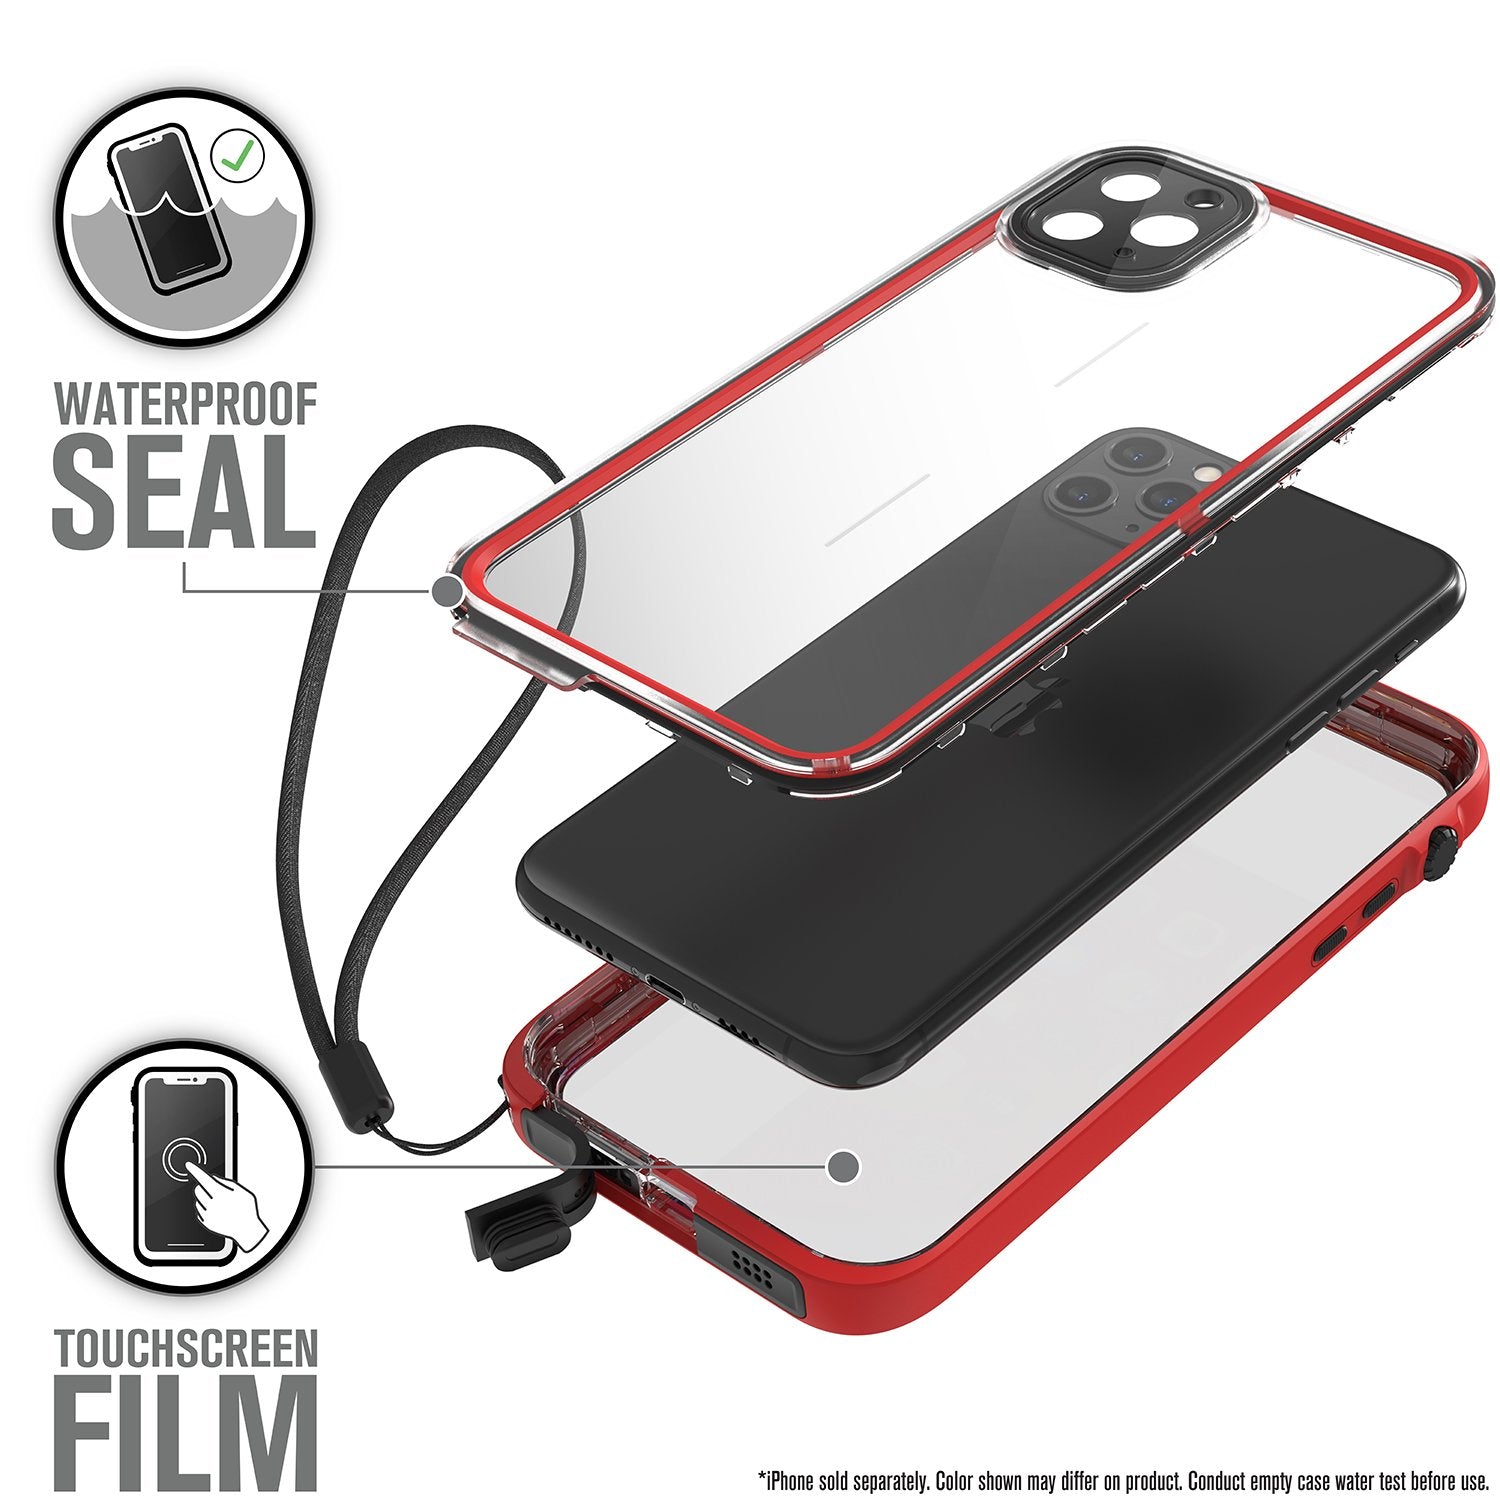 Catalyst iphone 11 pro max waterproof case showing the case screen film in flame red colorway